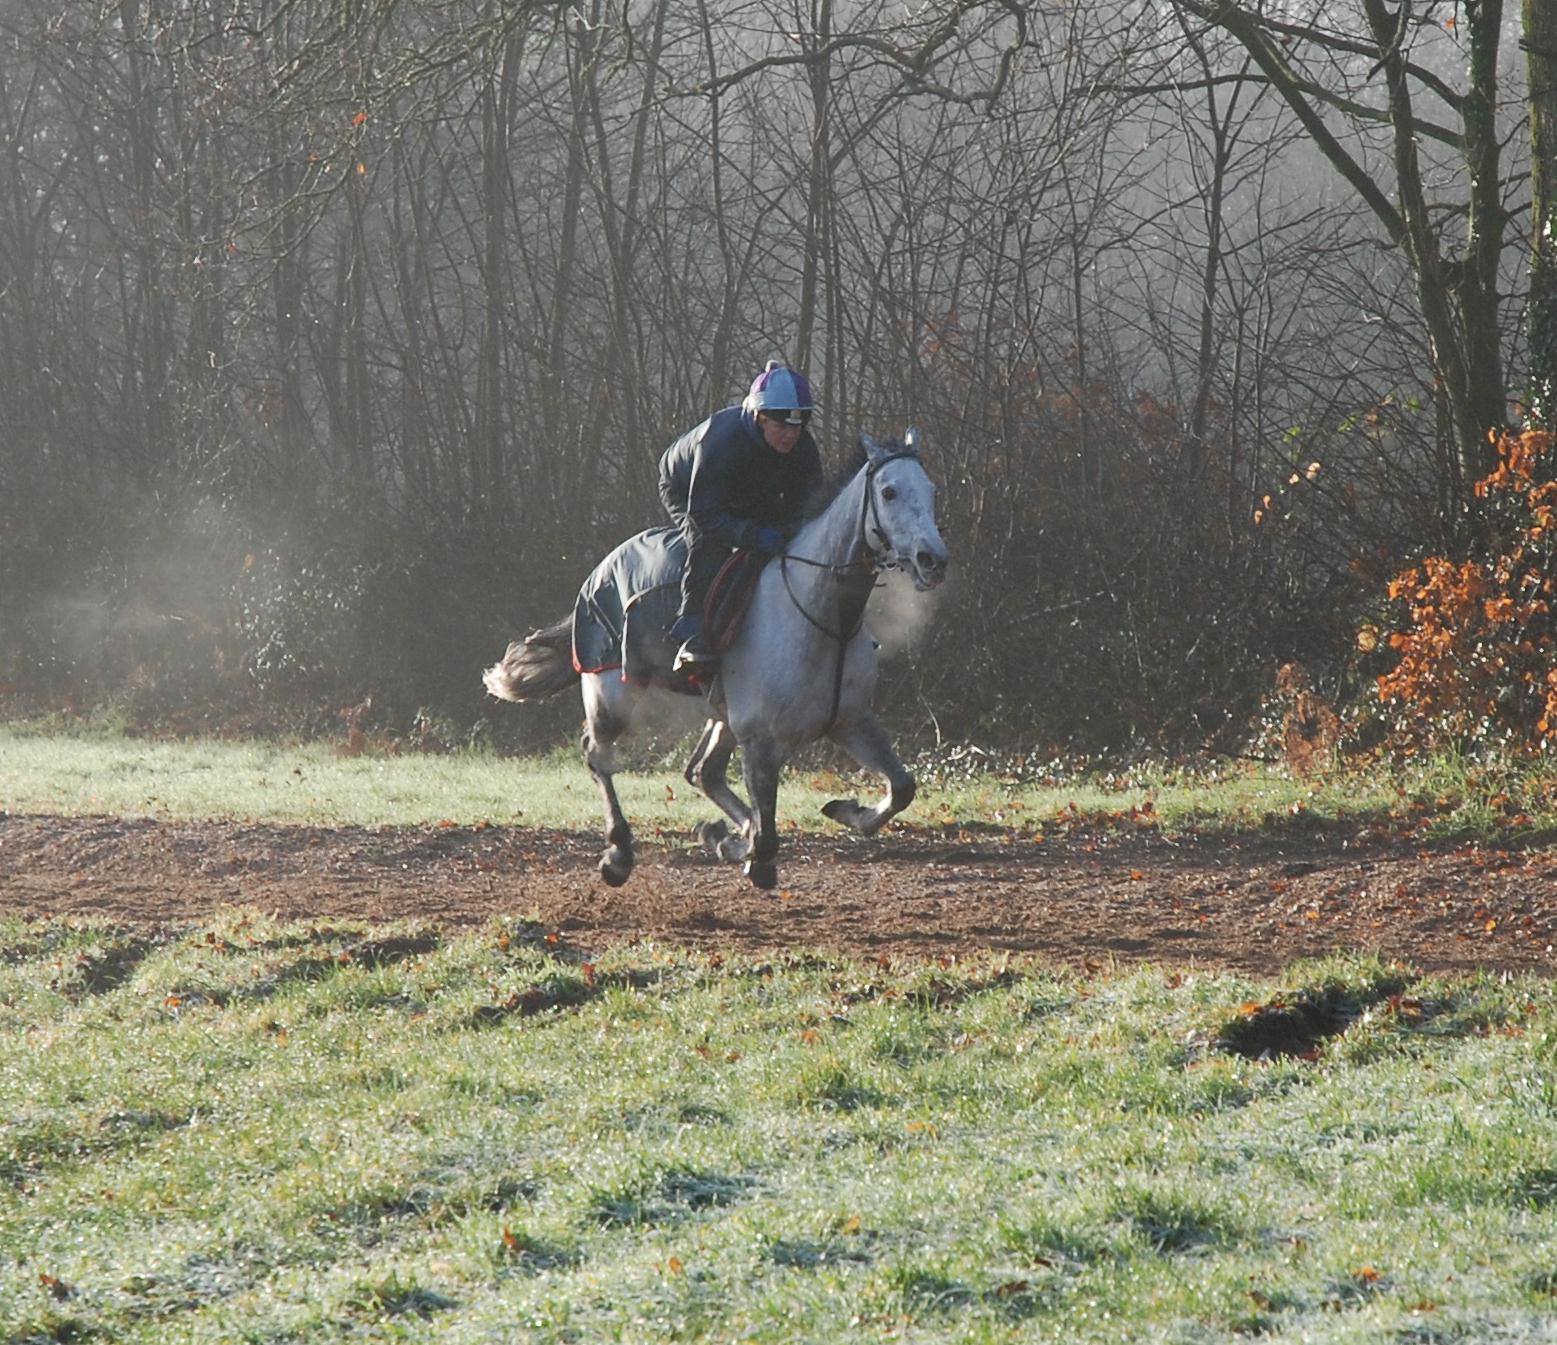 Great_Endeavour_gallops